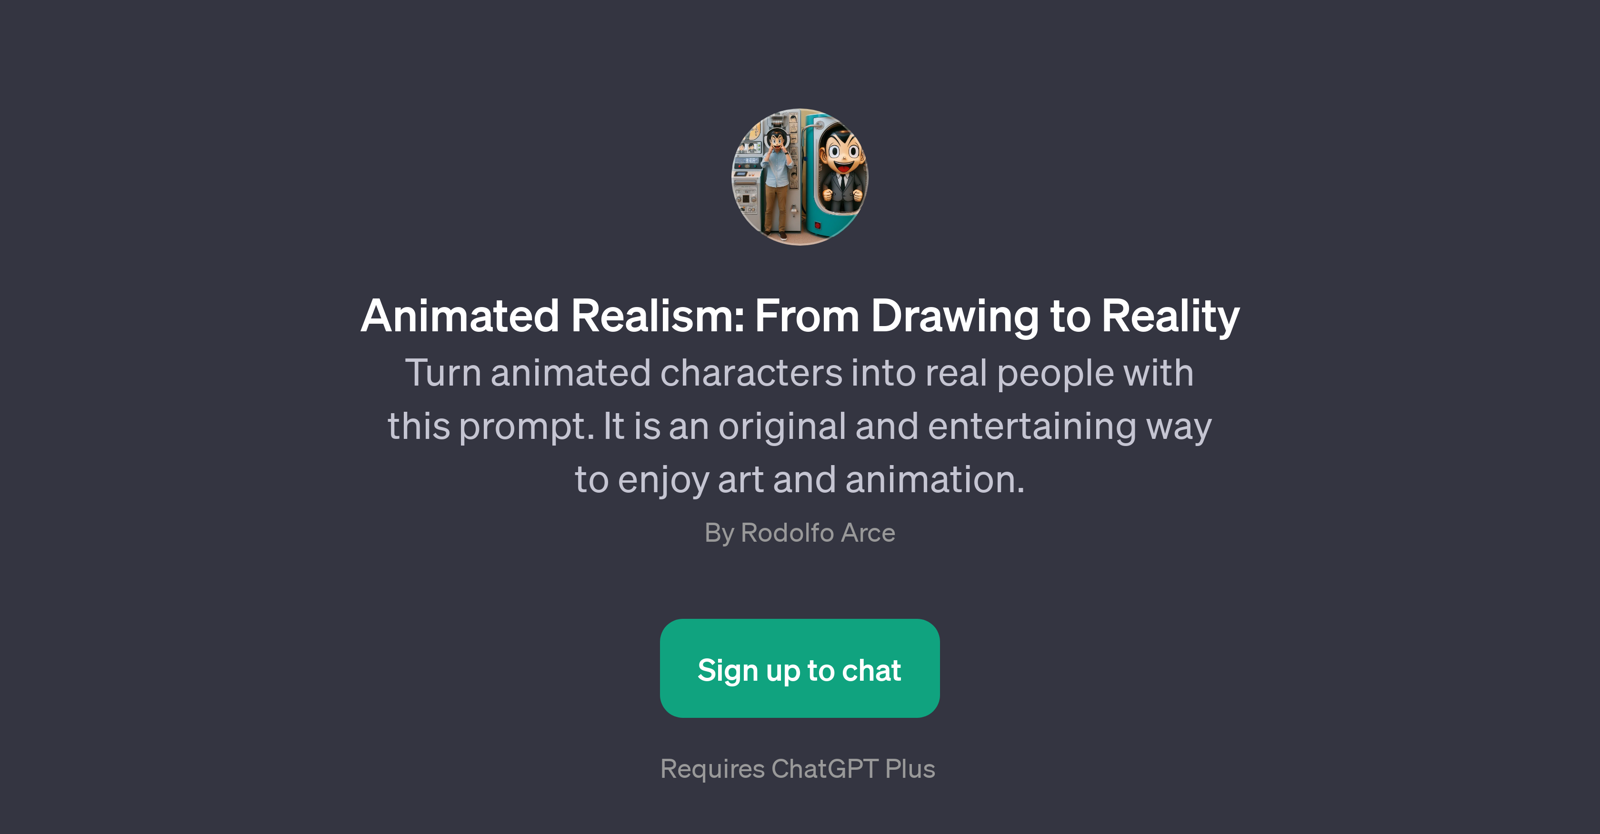 Animated Realism: From Drawing to Reality website